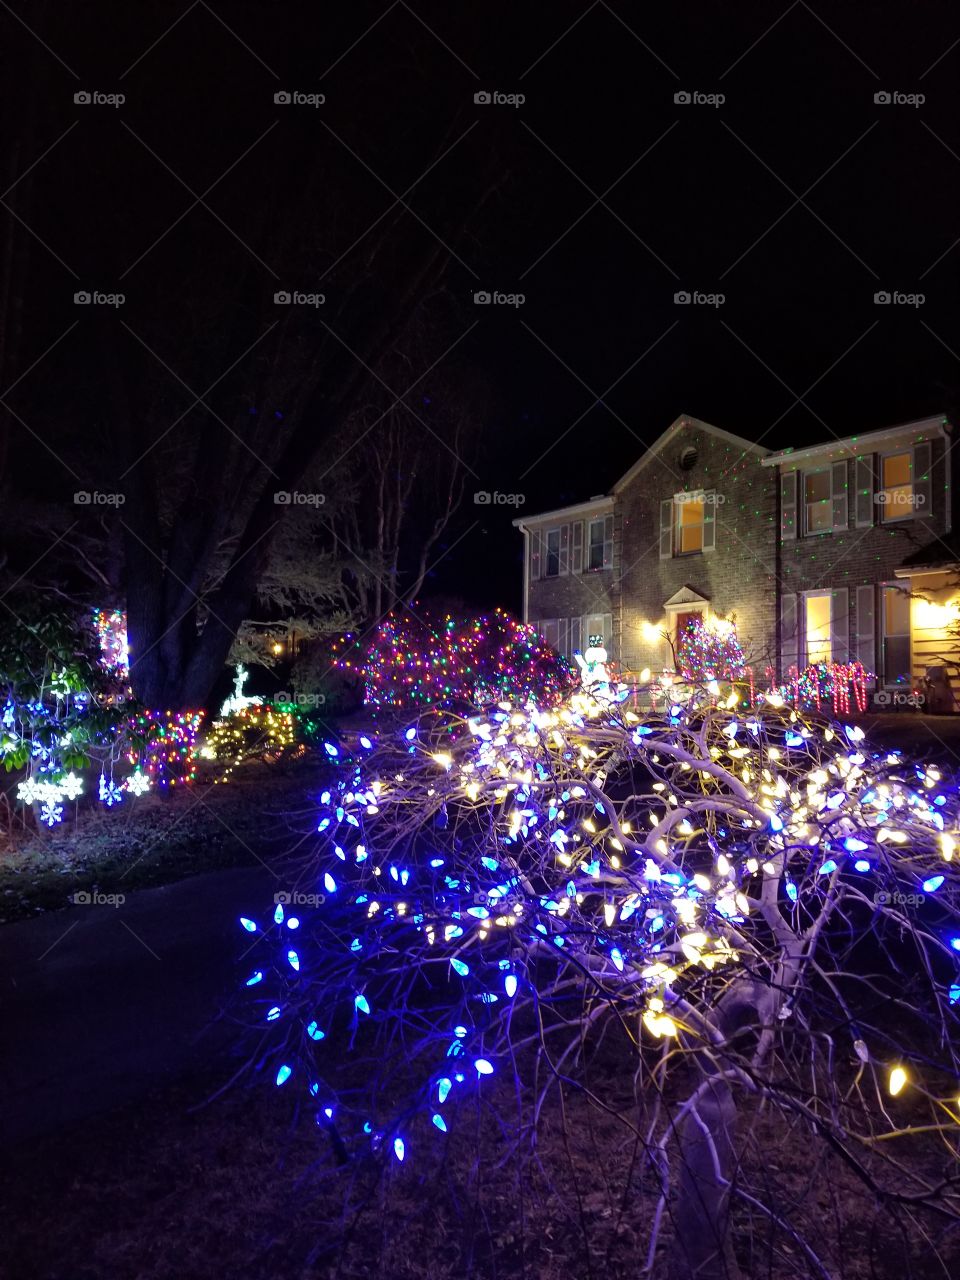 Christmas lights and decorations at night in Ellicott City, Maryland